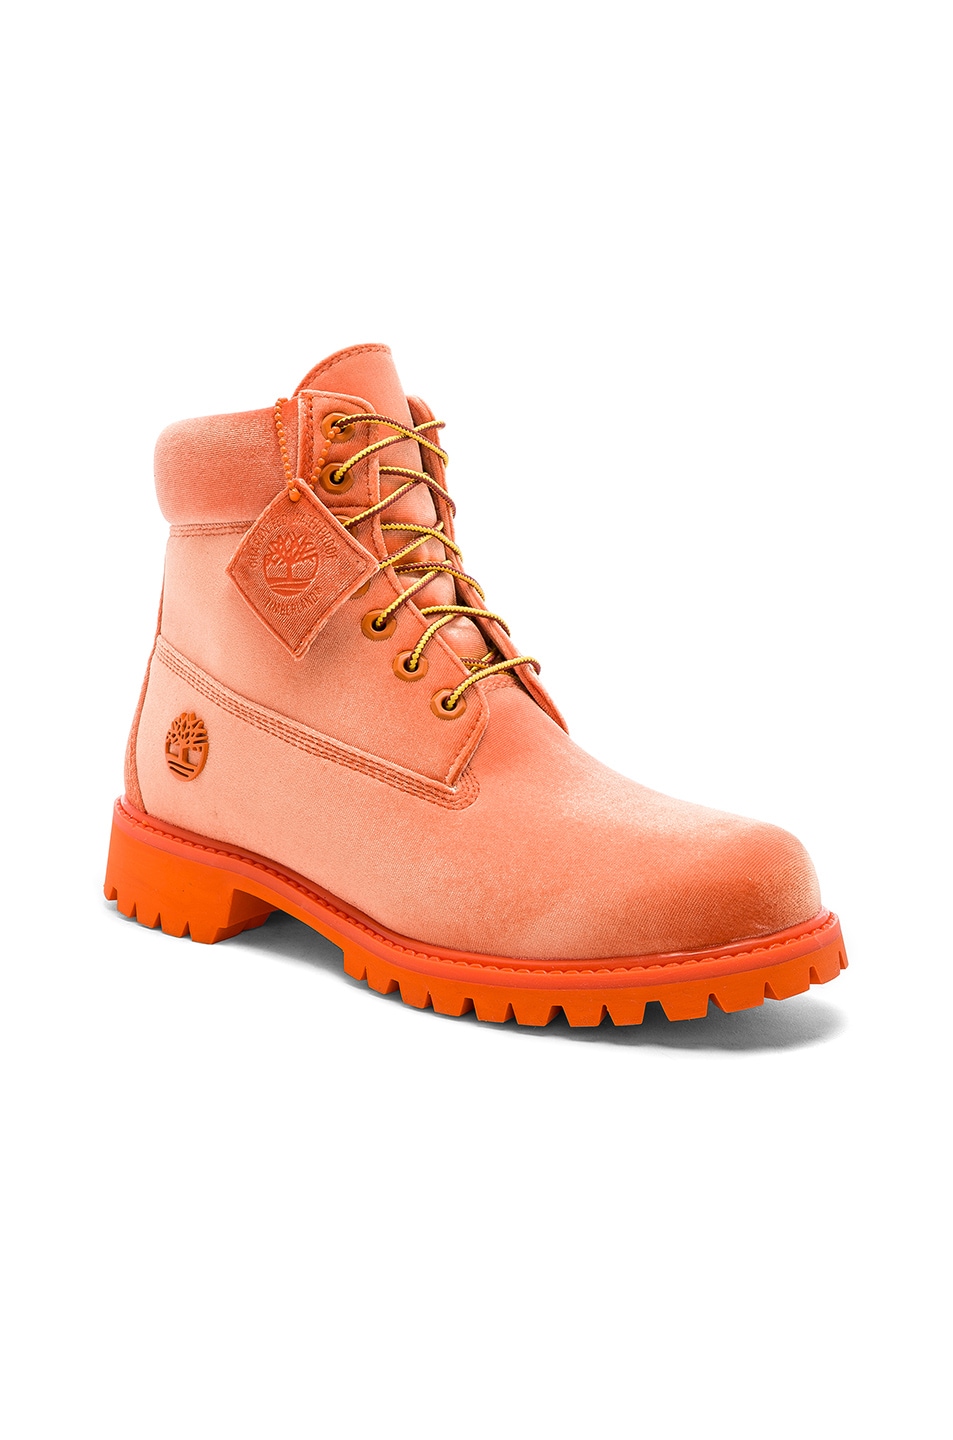 Image 1 of OFF-WHITE x Timberland Velvet Boots in Orange